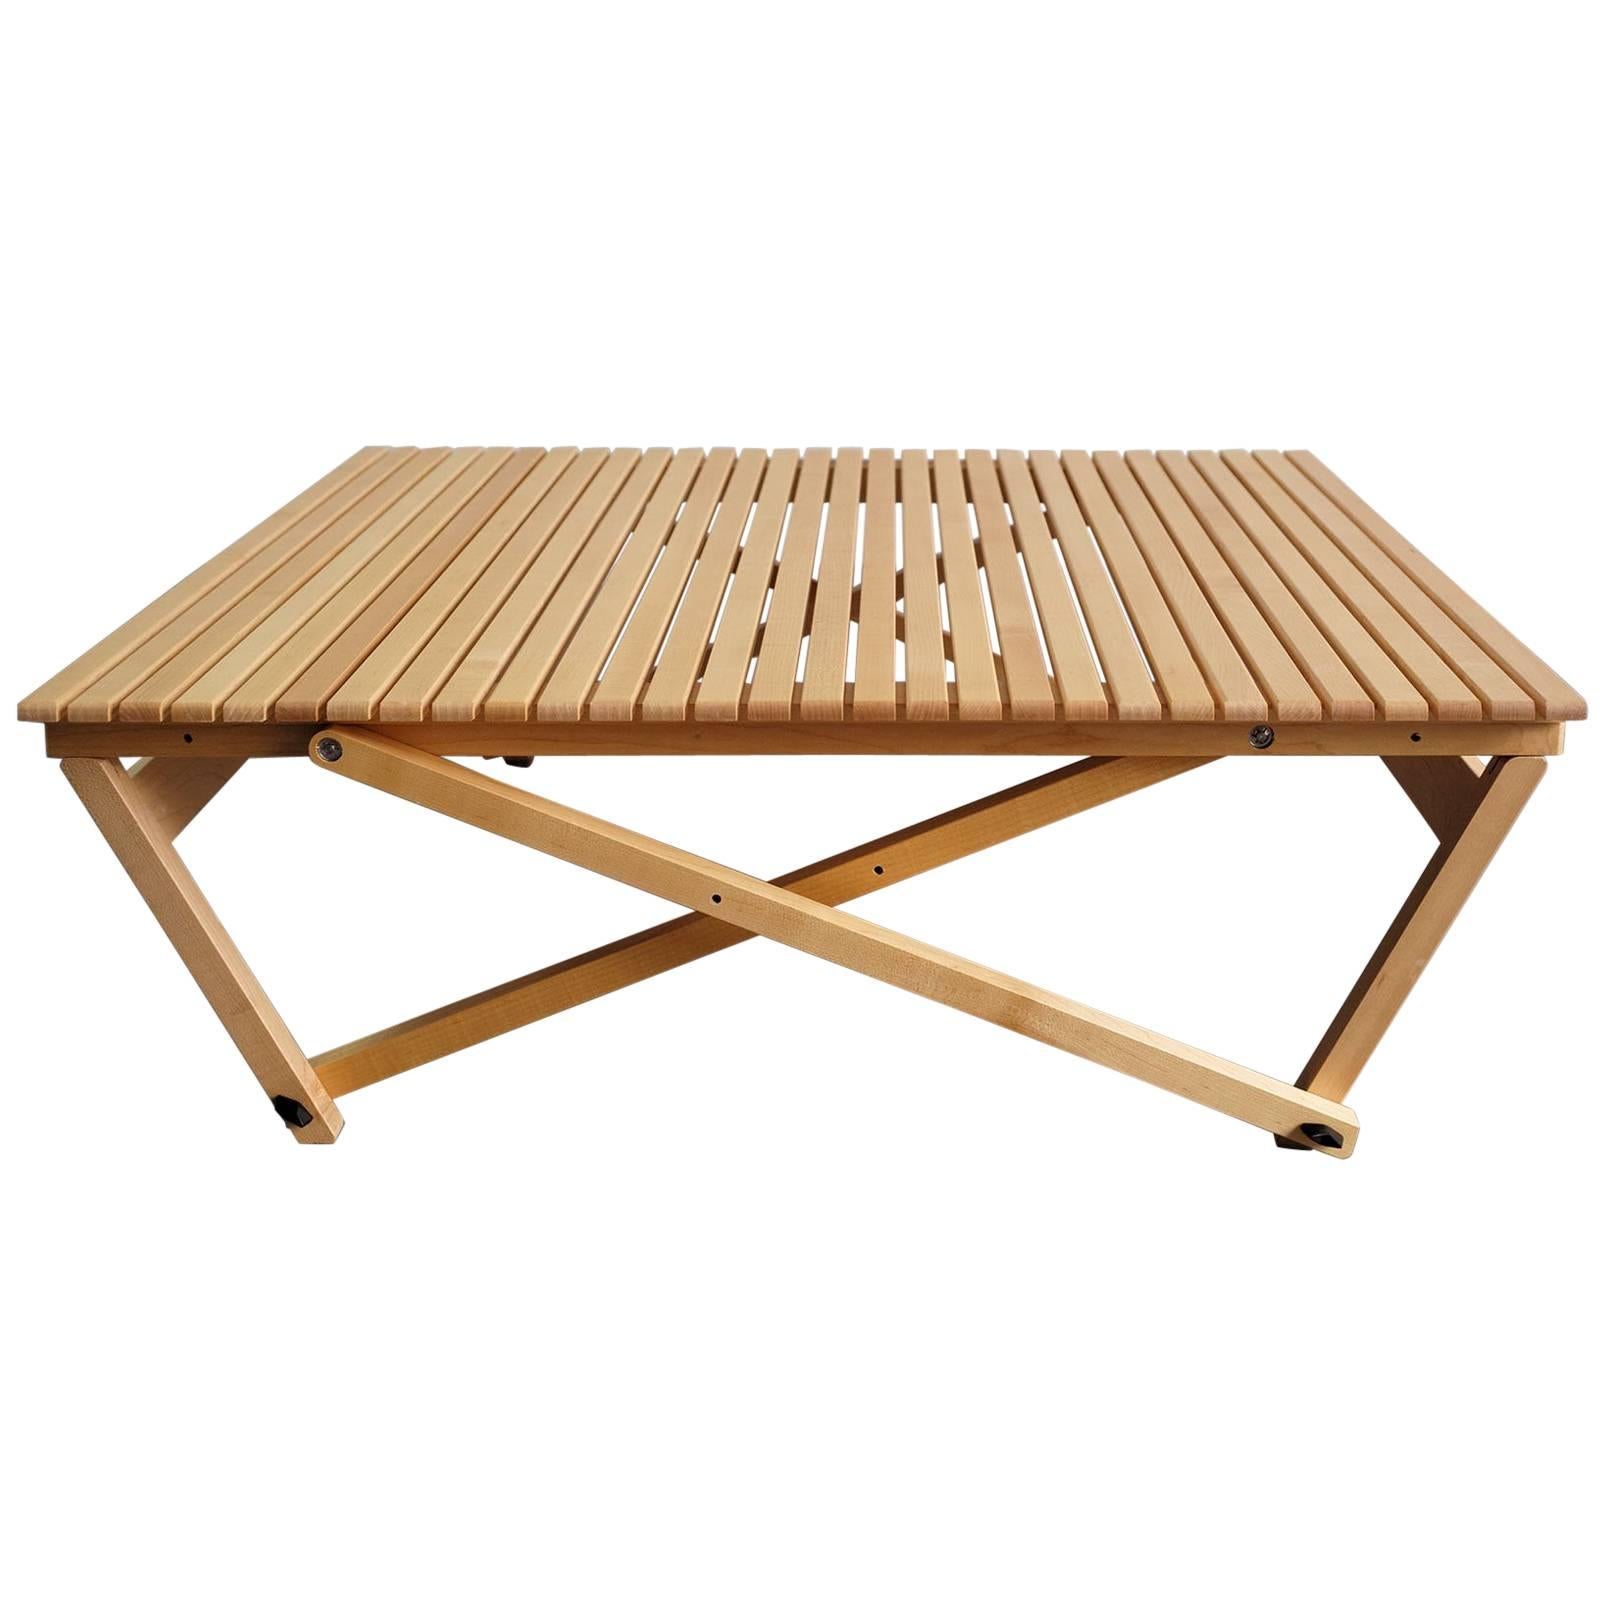 Jean-Claude Duboys, A6 Maple System Table, France, 1980